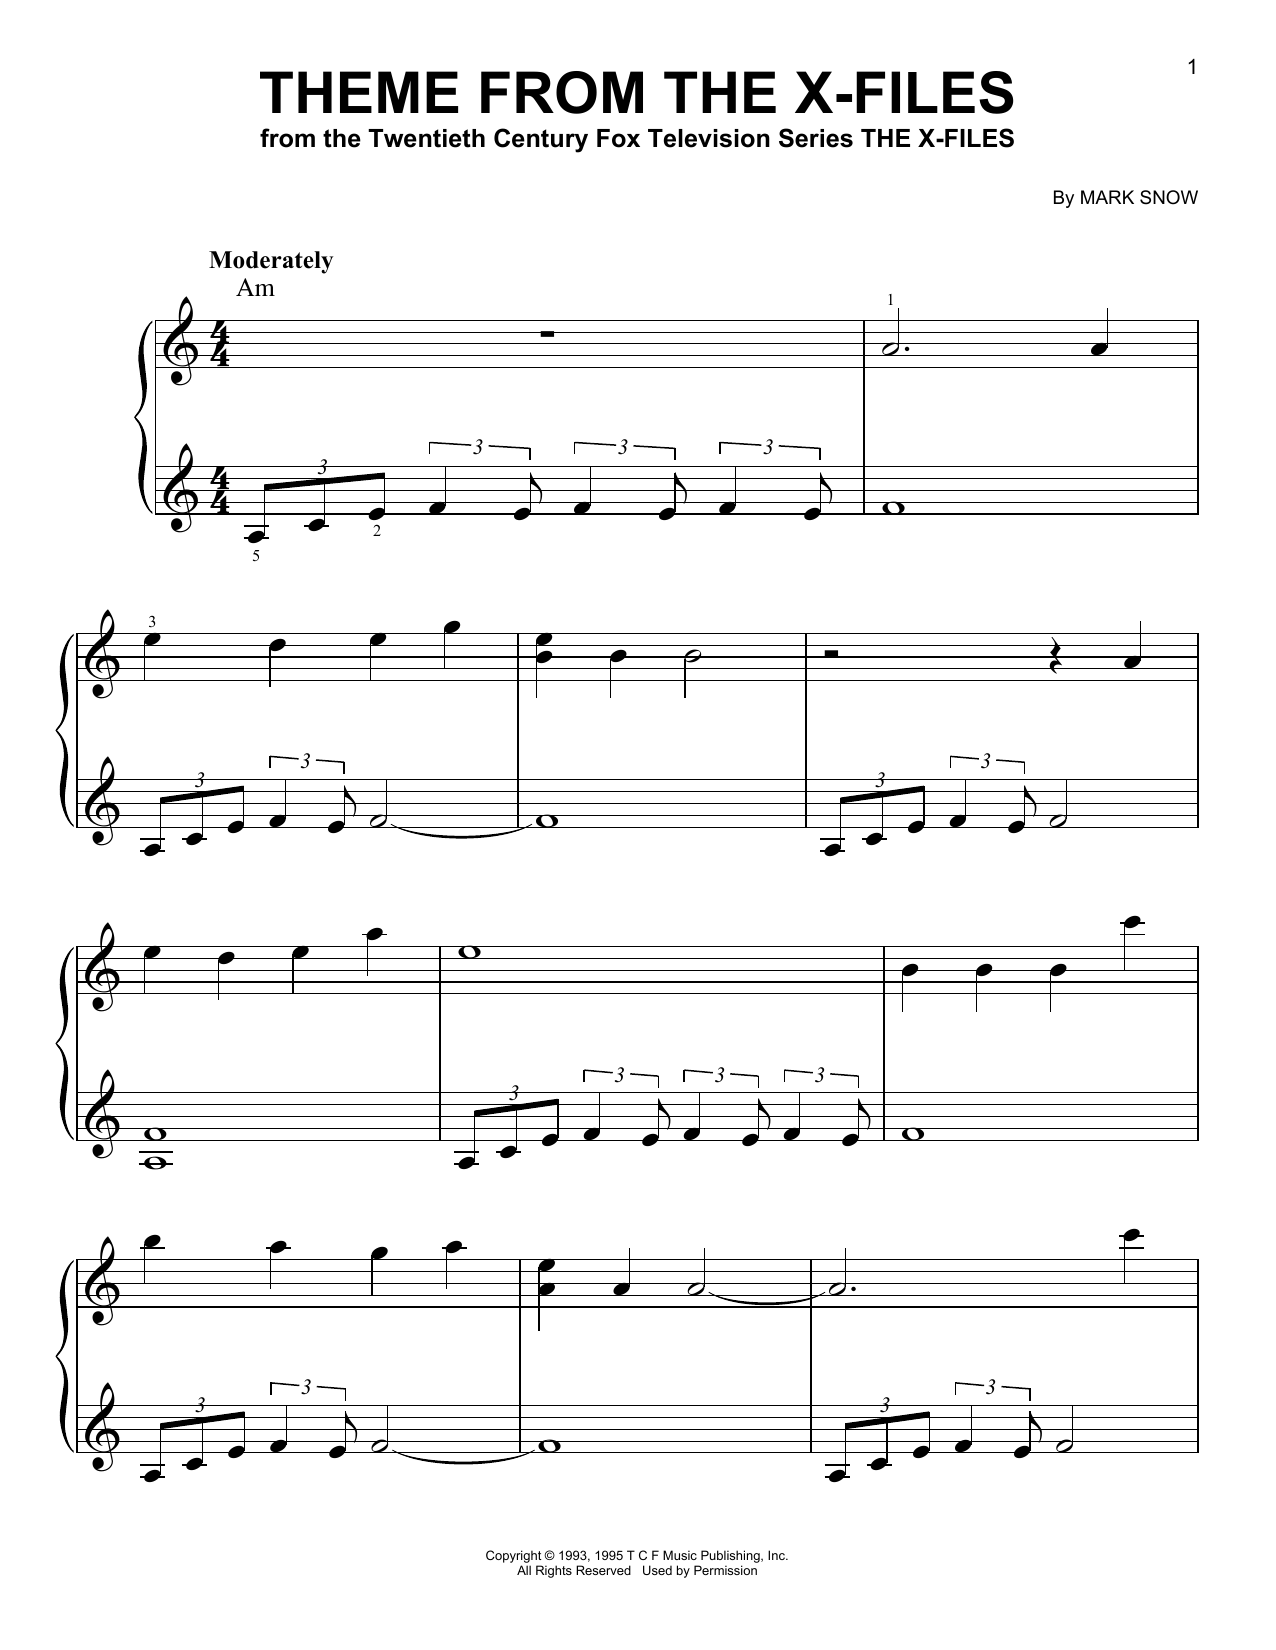 Download Mark Snow Theme From The X-Files Sheet Music